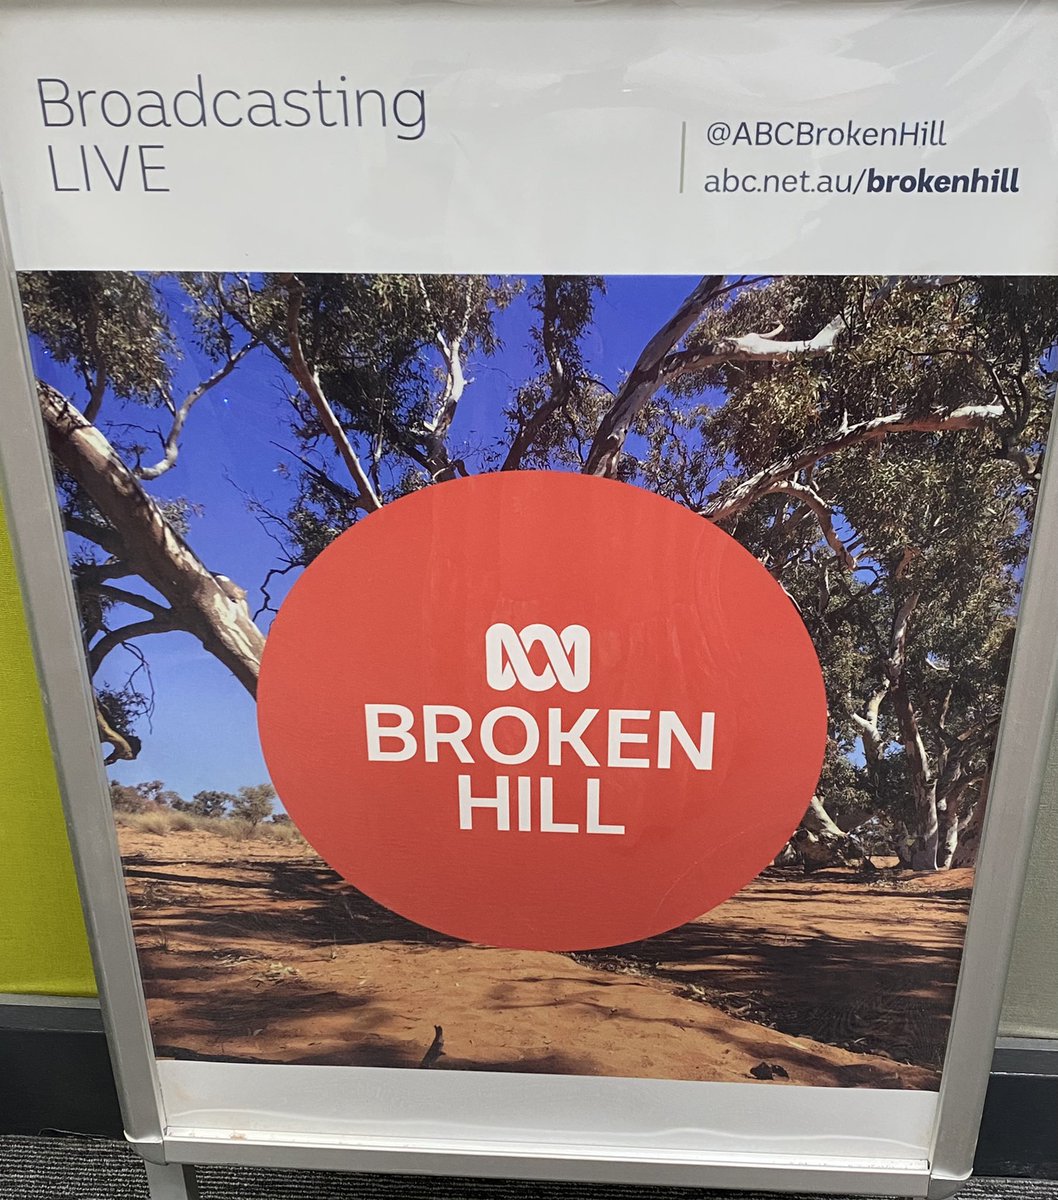 Miss outside broadcasts so much.. #radio #broadcastinglive #ABCBrokenHill